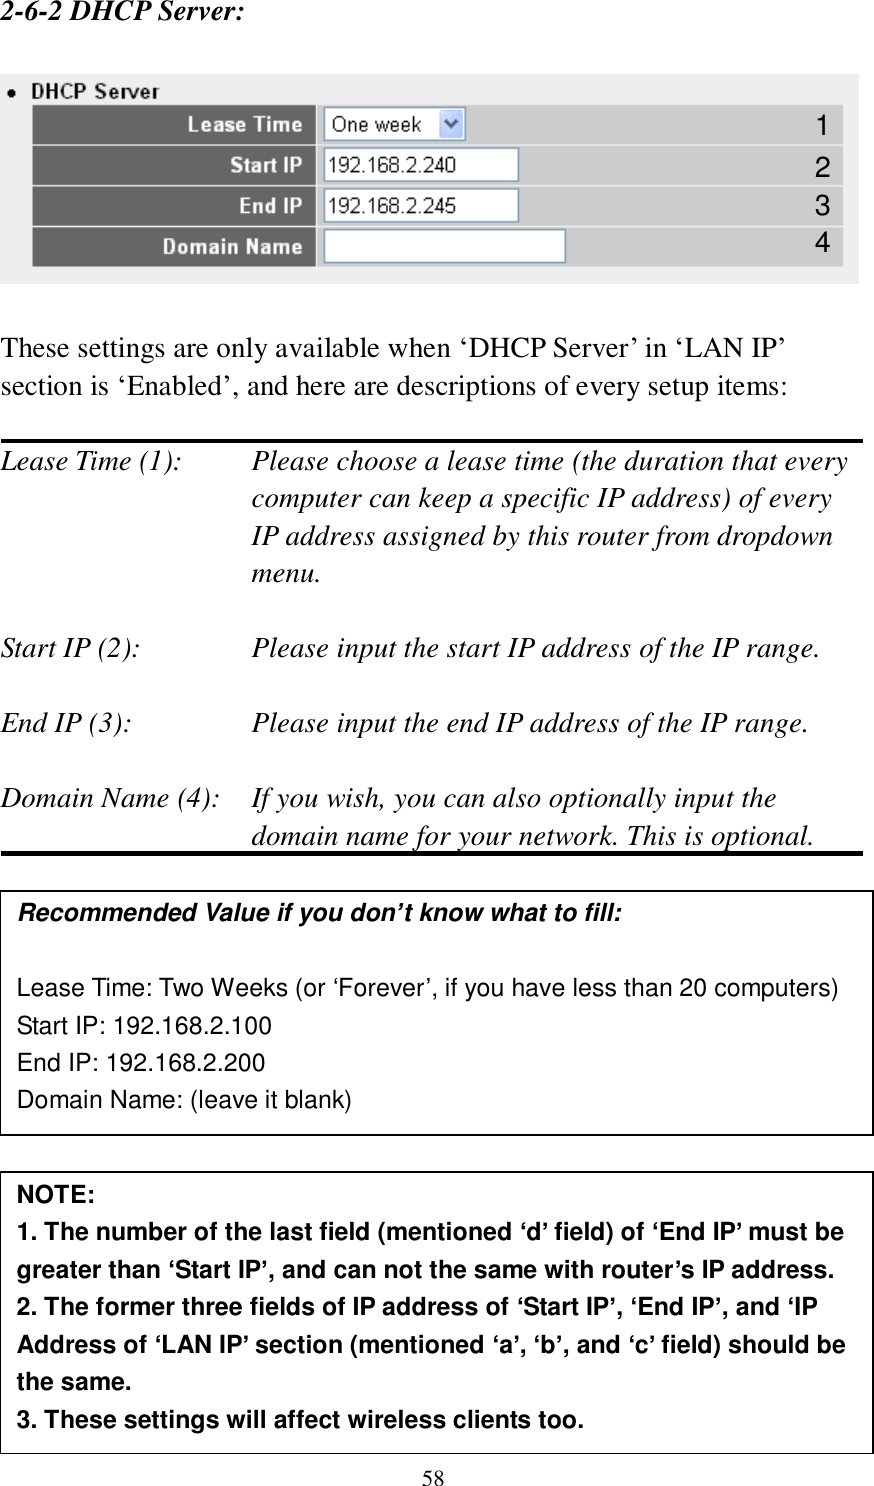 58 2-6-2 DHCP Server:    These settings are only available when „DHCP Server‟ in „LAN IP‟ section is „Enabled‟, and here are descriptions of every setup items:  Lease Time (1):    Please choose a lease time (the duration that every computer can keep a specific IP address) of every IP address assigned by this router from dropdown menu.  Start IP (2):      Please input the start IP address of the IP range.  End IP (3):       Please input the end IP address of the IP range.  Domain Name (4):    If you wish, you can also optionally input the domain name for your network. This is optional.                Recommended Value if you don’t know what to fill:  Lease Time: Two Weeks (or ‘Forever’, if you have less than 20 computers) Start IP: 192.168.2.100 End IP: 192.168.2.200 Domain Name: (leave it blank) NOTE:   1. The number of the last field (mentioned ‘d’ field) of ‘End IP’ must be greater than ‘Start IP’, and can not the same with router’s IP address. 2. The former three fields of IP address of ‘Start IP’, ‘End IP’, and ‘IP Address of ‘LAN IP’ section (mentioned ‘a’, ‘b’, and ‘c’ field) should be the same. 3. These settings will affect wireless clients too. 1 3 4 2 